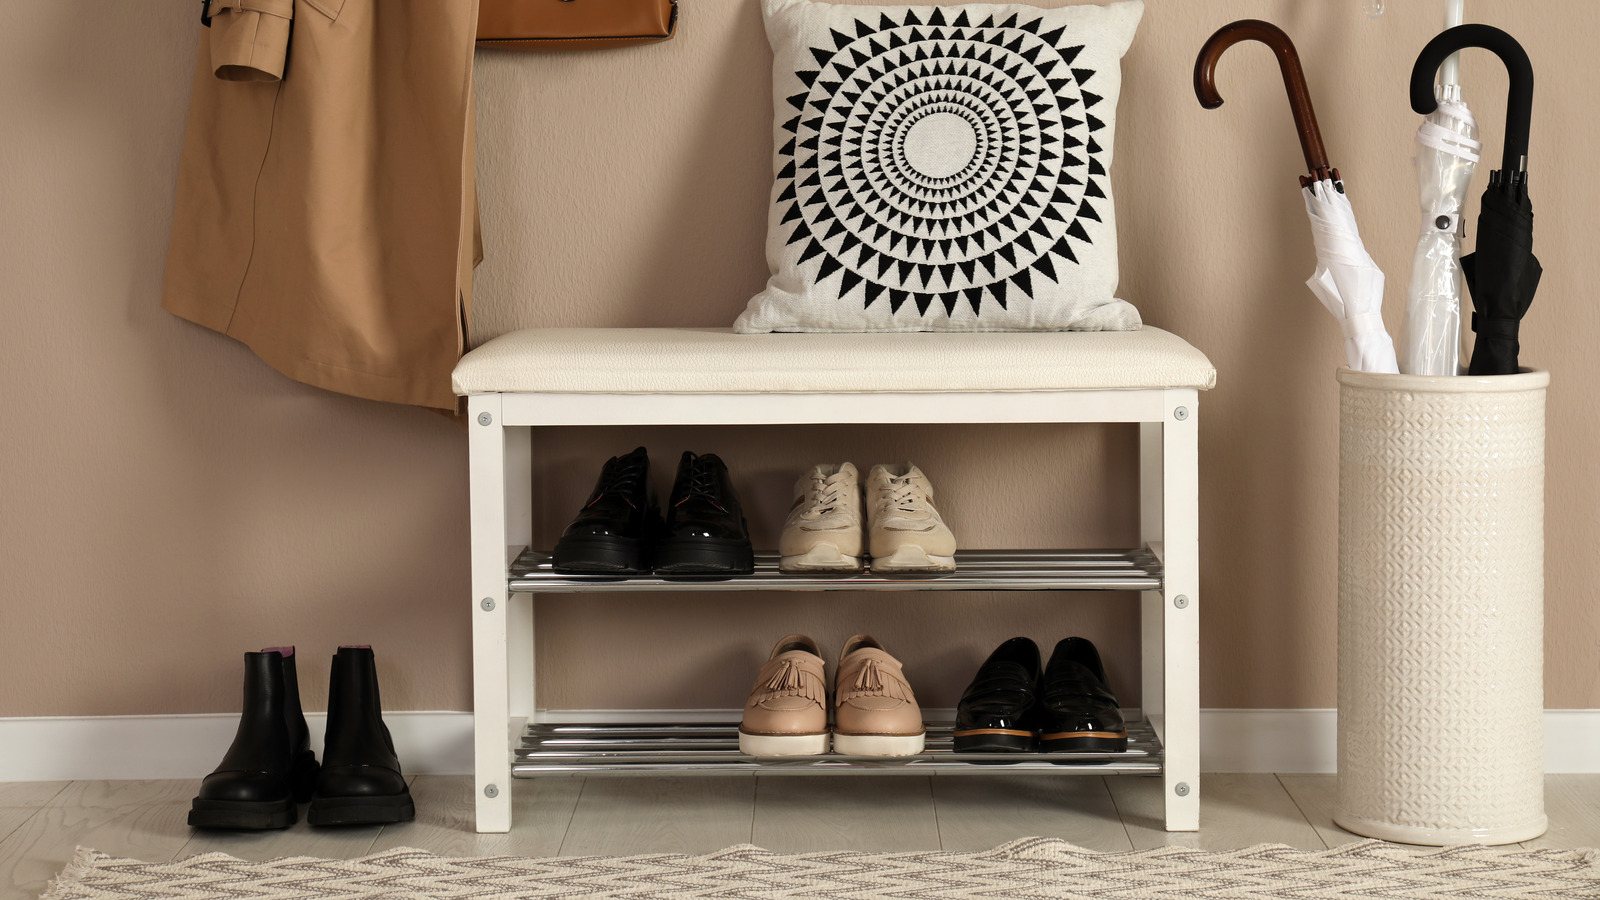 https://www.housedigest.com/img/gallery/the-7-best-shoe-storage-benches-to-help-you-stay-organized-in-style/l-intro-1695658918.jpg